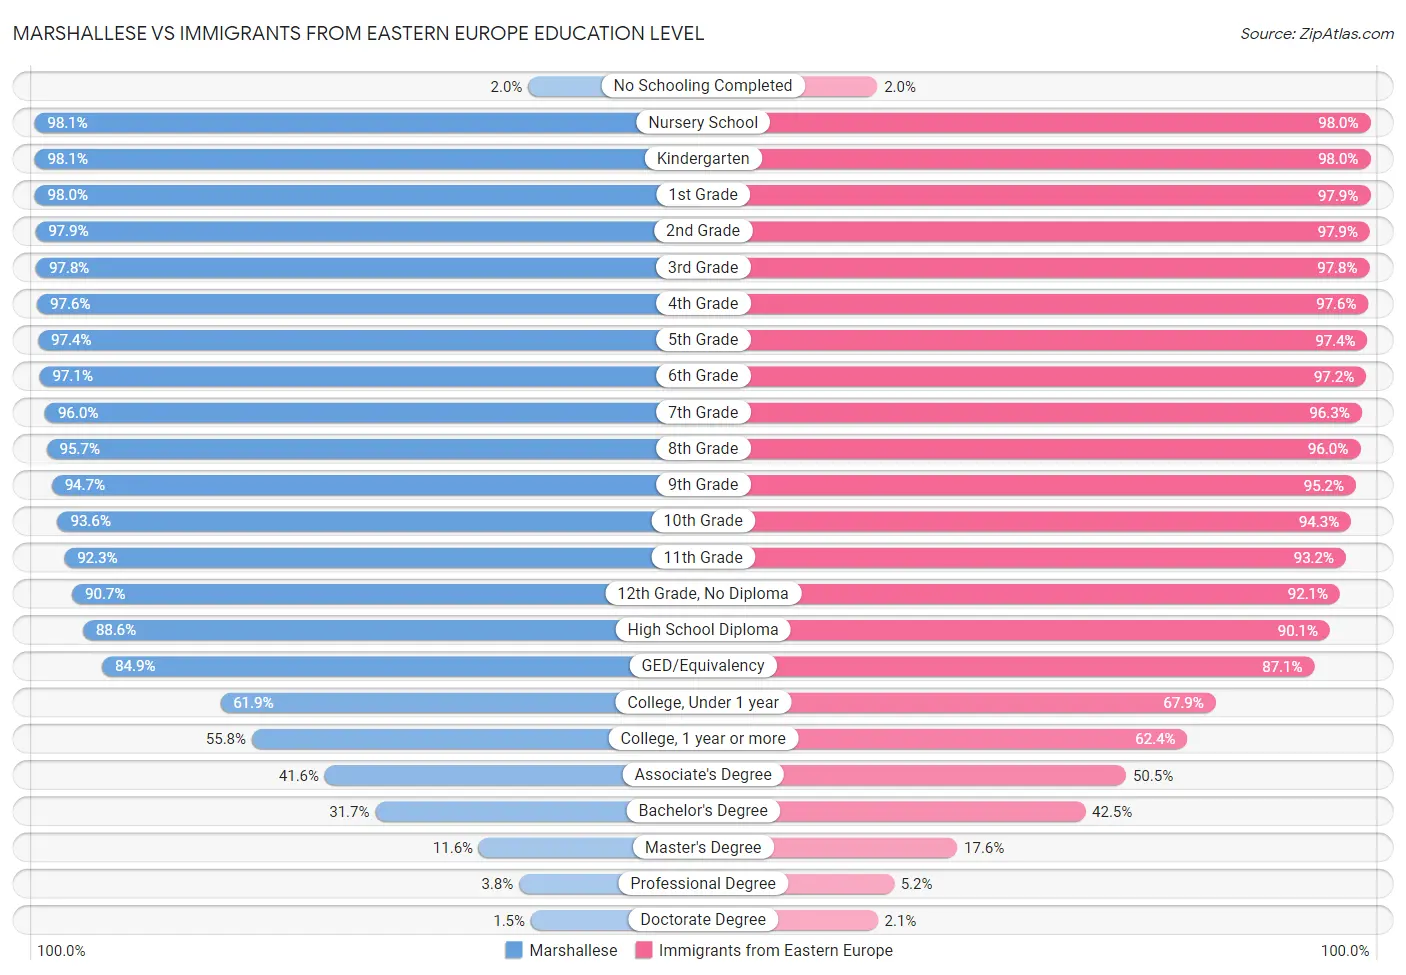 Marshallese vs Immigrants from Eastern Europe Education Level